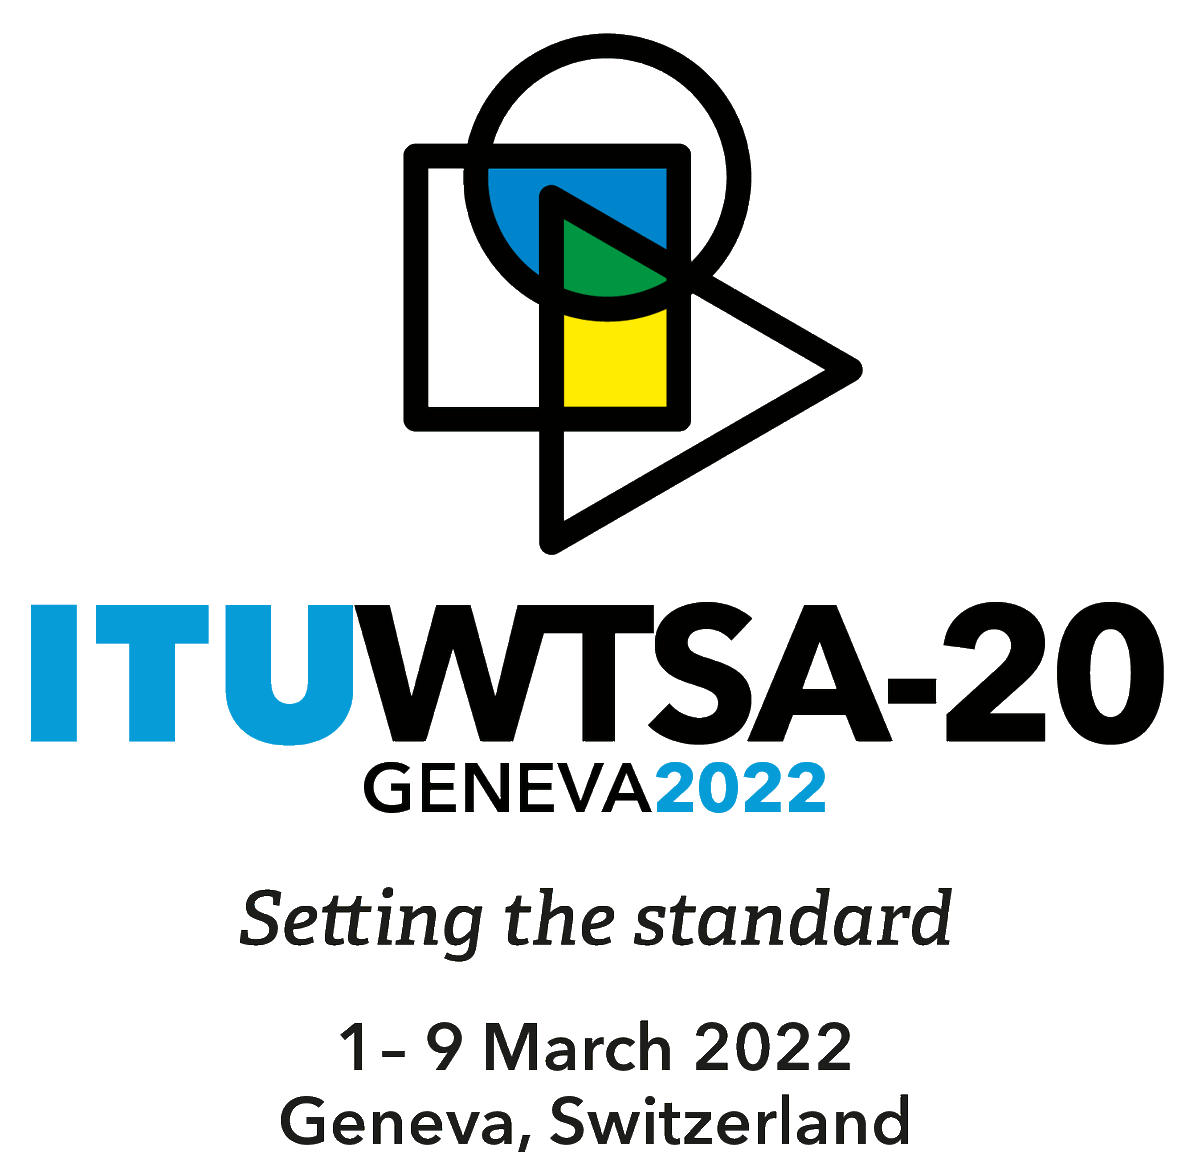 As #WTSA20 begins today, delegates are hard at work to achieve international #standards that pave the way for an inclusive digital future. Global interoperability is critical to advance #ICT4SDG, achieve our dream of a fully connected planet. #GlobalGoals #2030Agenda